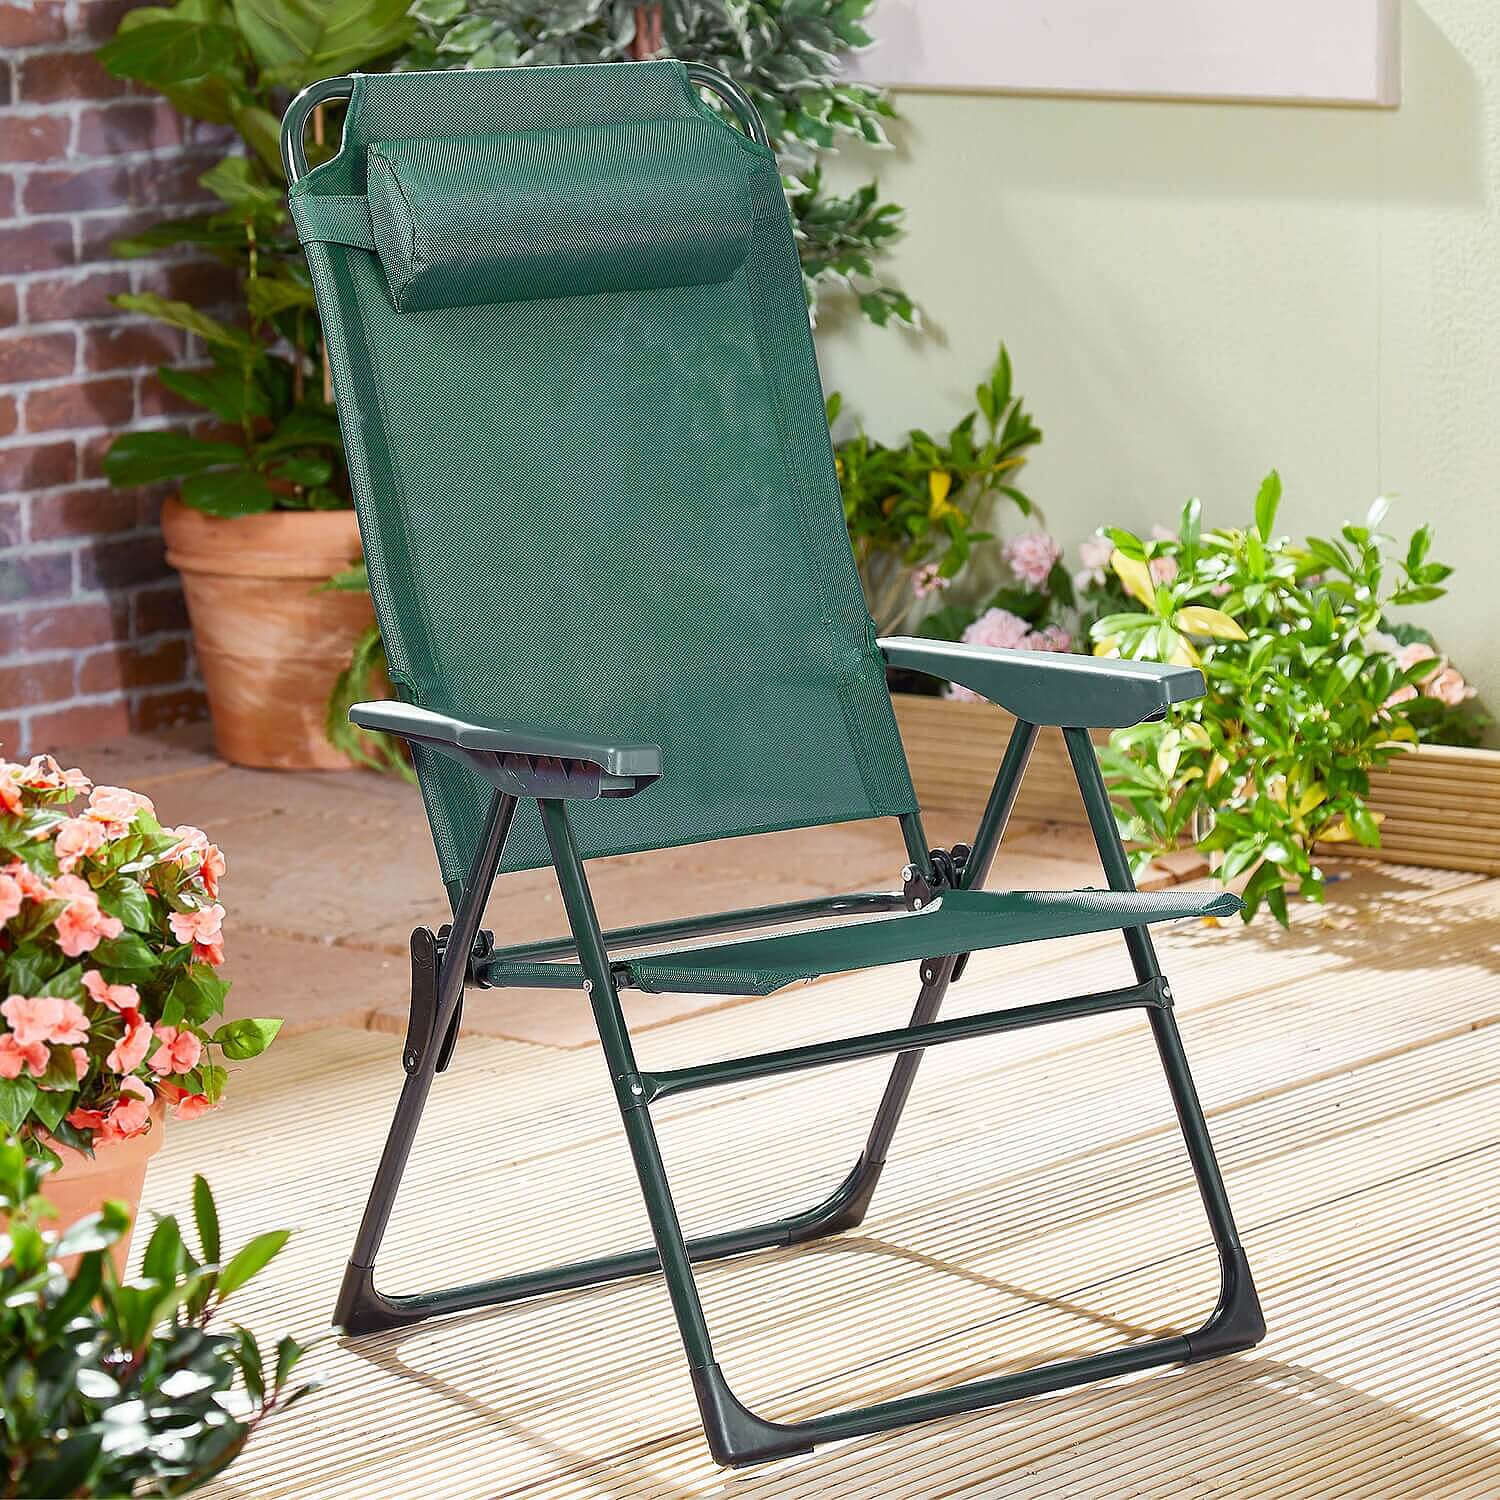 Oakley Folding Chairs & Footstools - Buy Both & Save £10